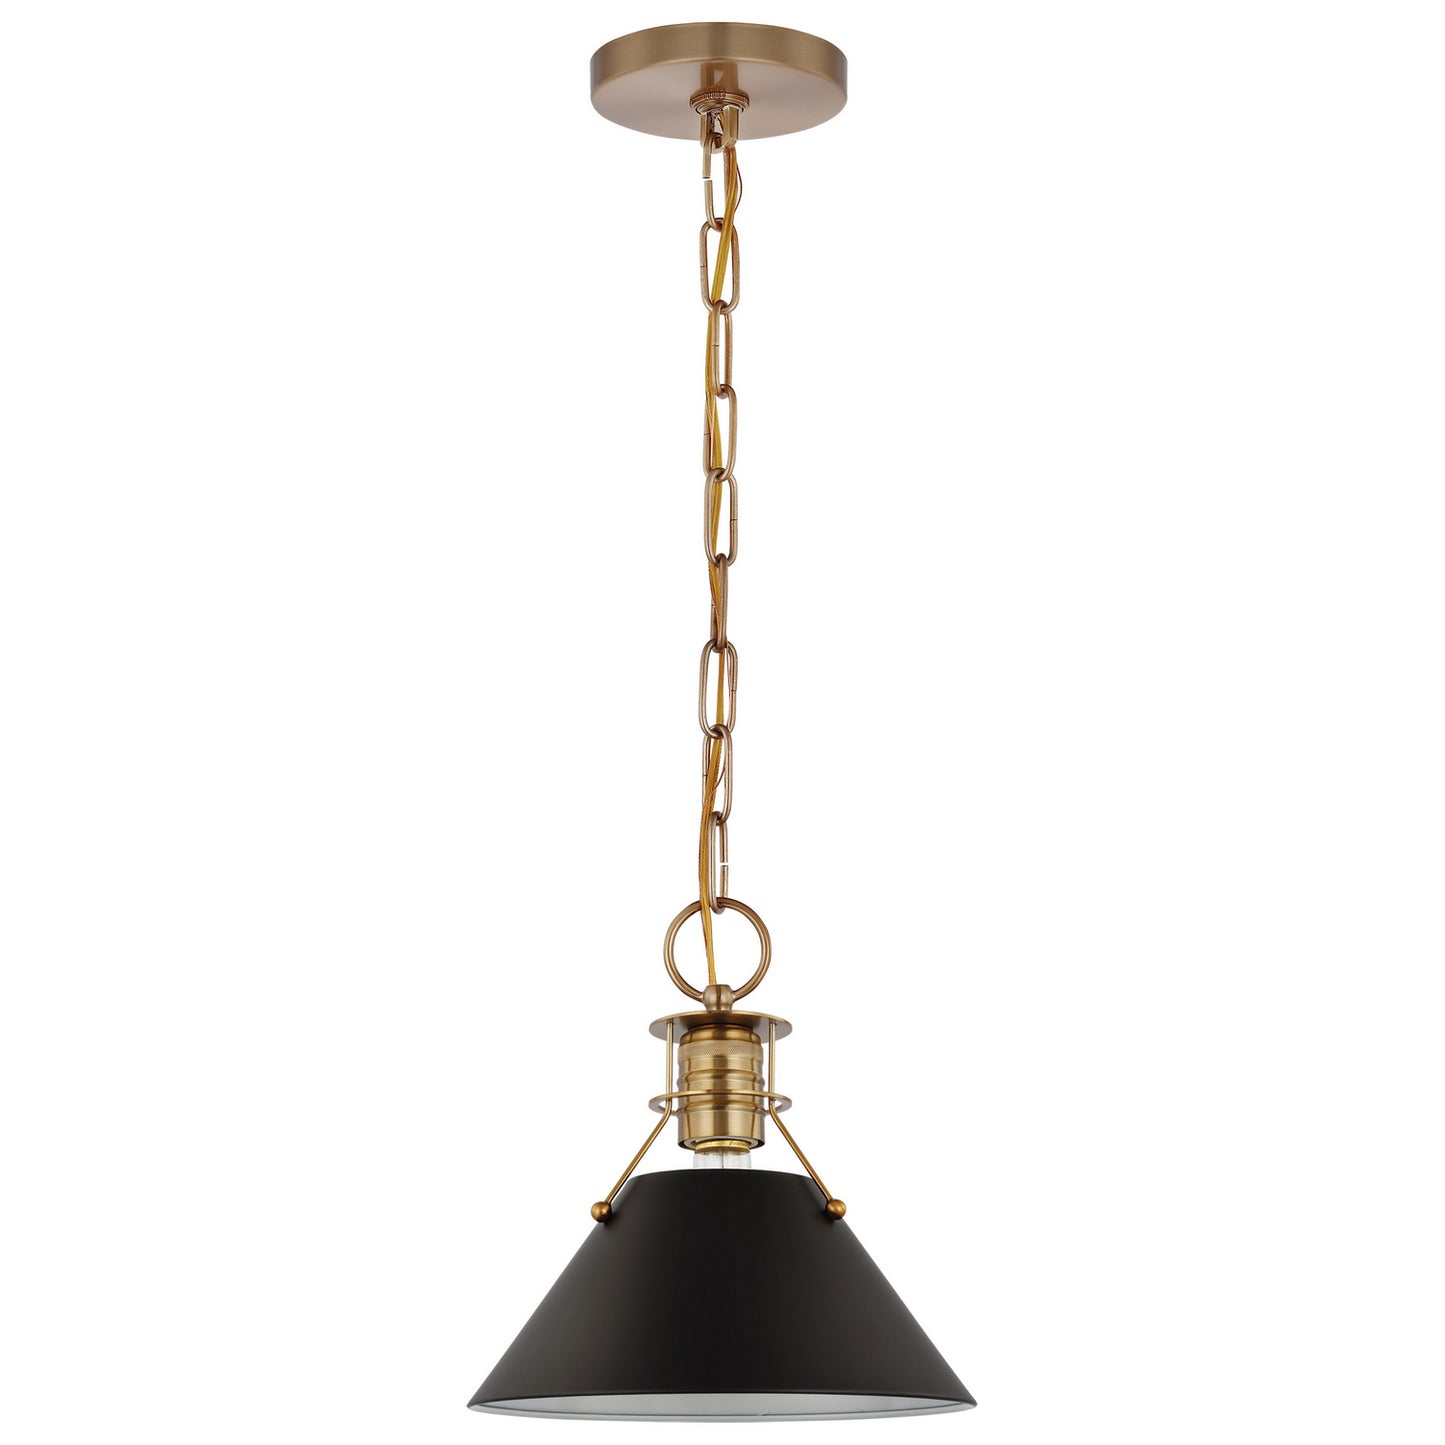 Outpost One Light Pendant by Nuvo Lighting in Matte Black / Burnished Brass Finish (60-7521)